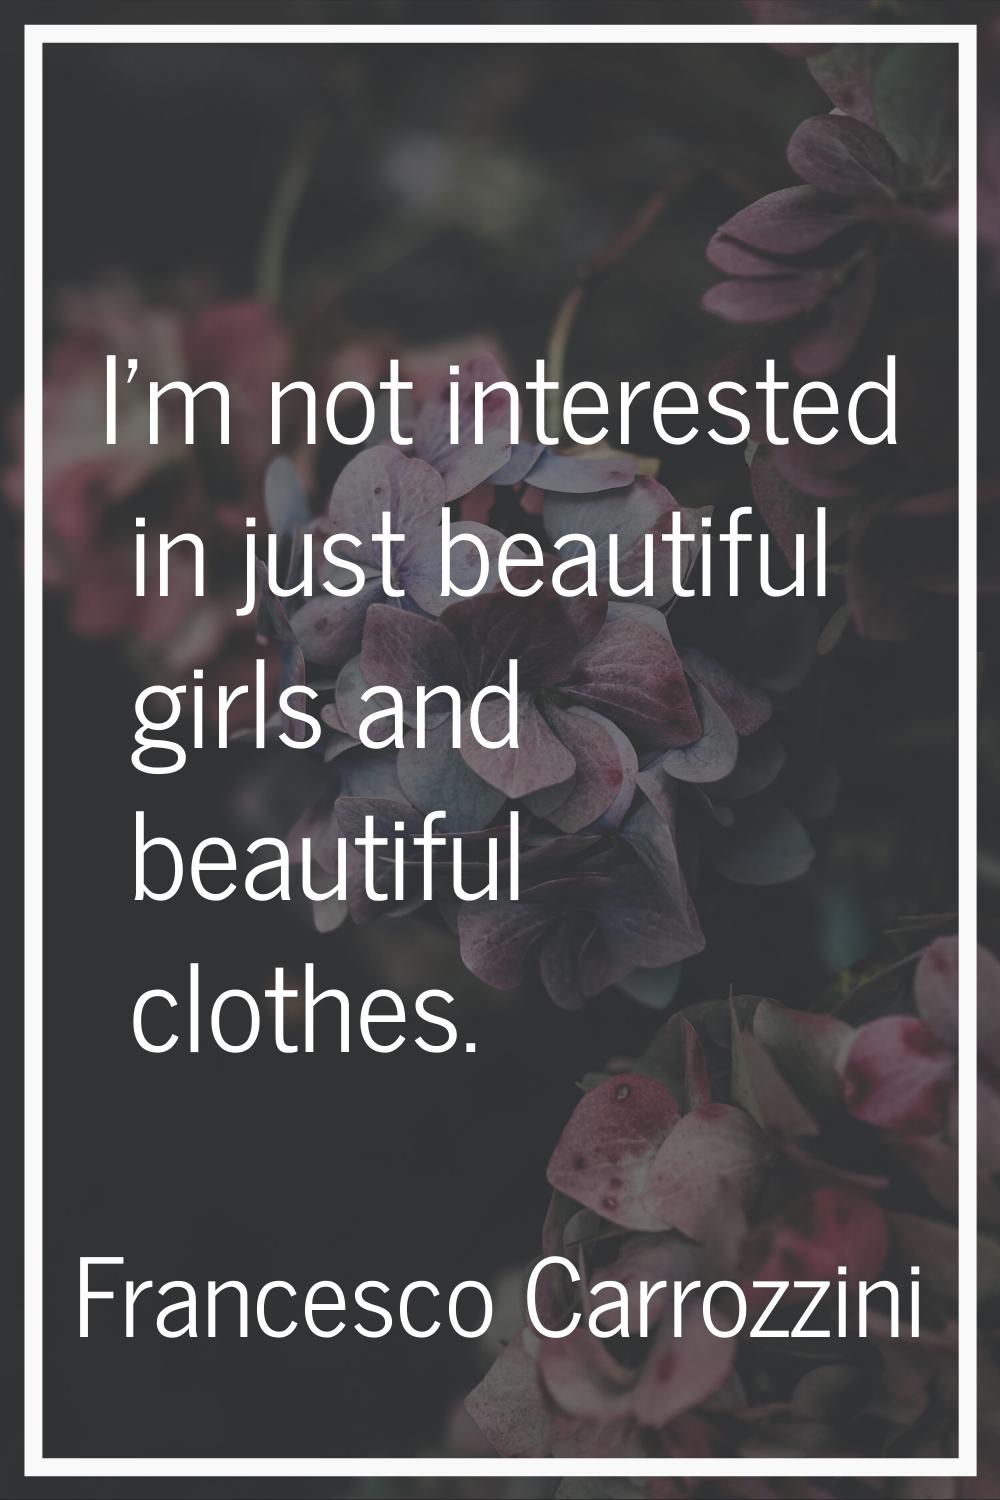 I'm not interested in just beautiful girls and beautiful clothes.